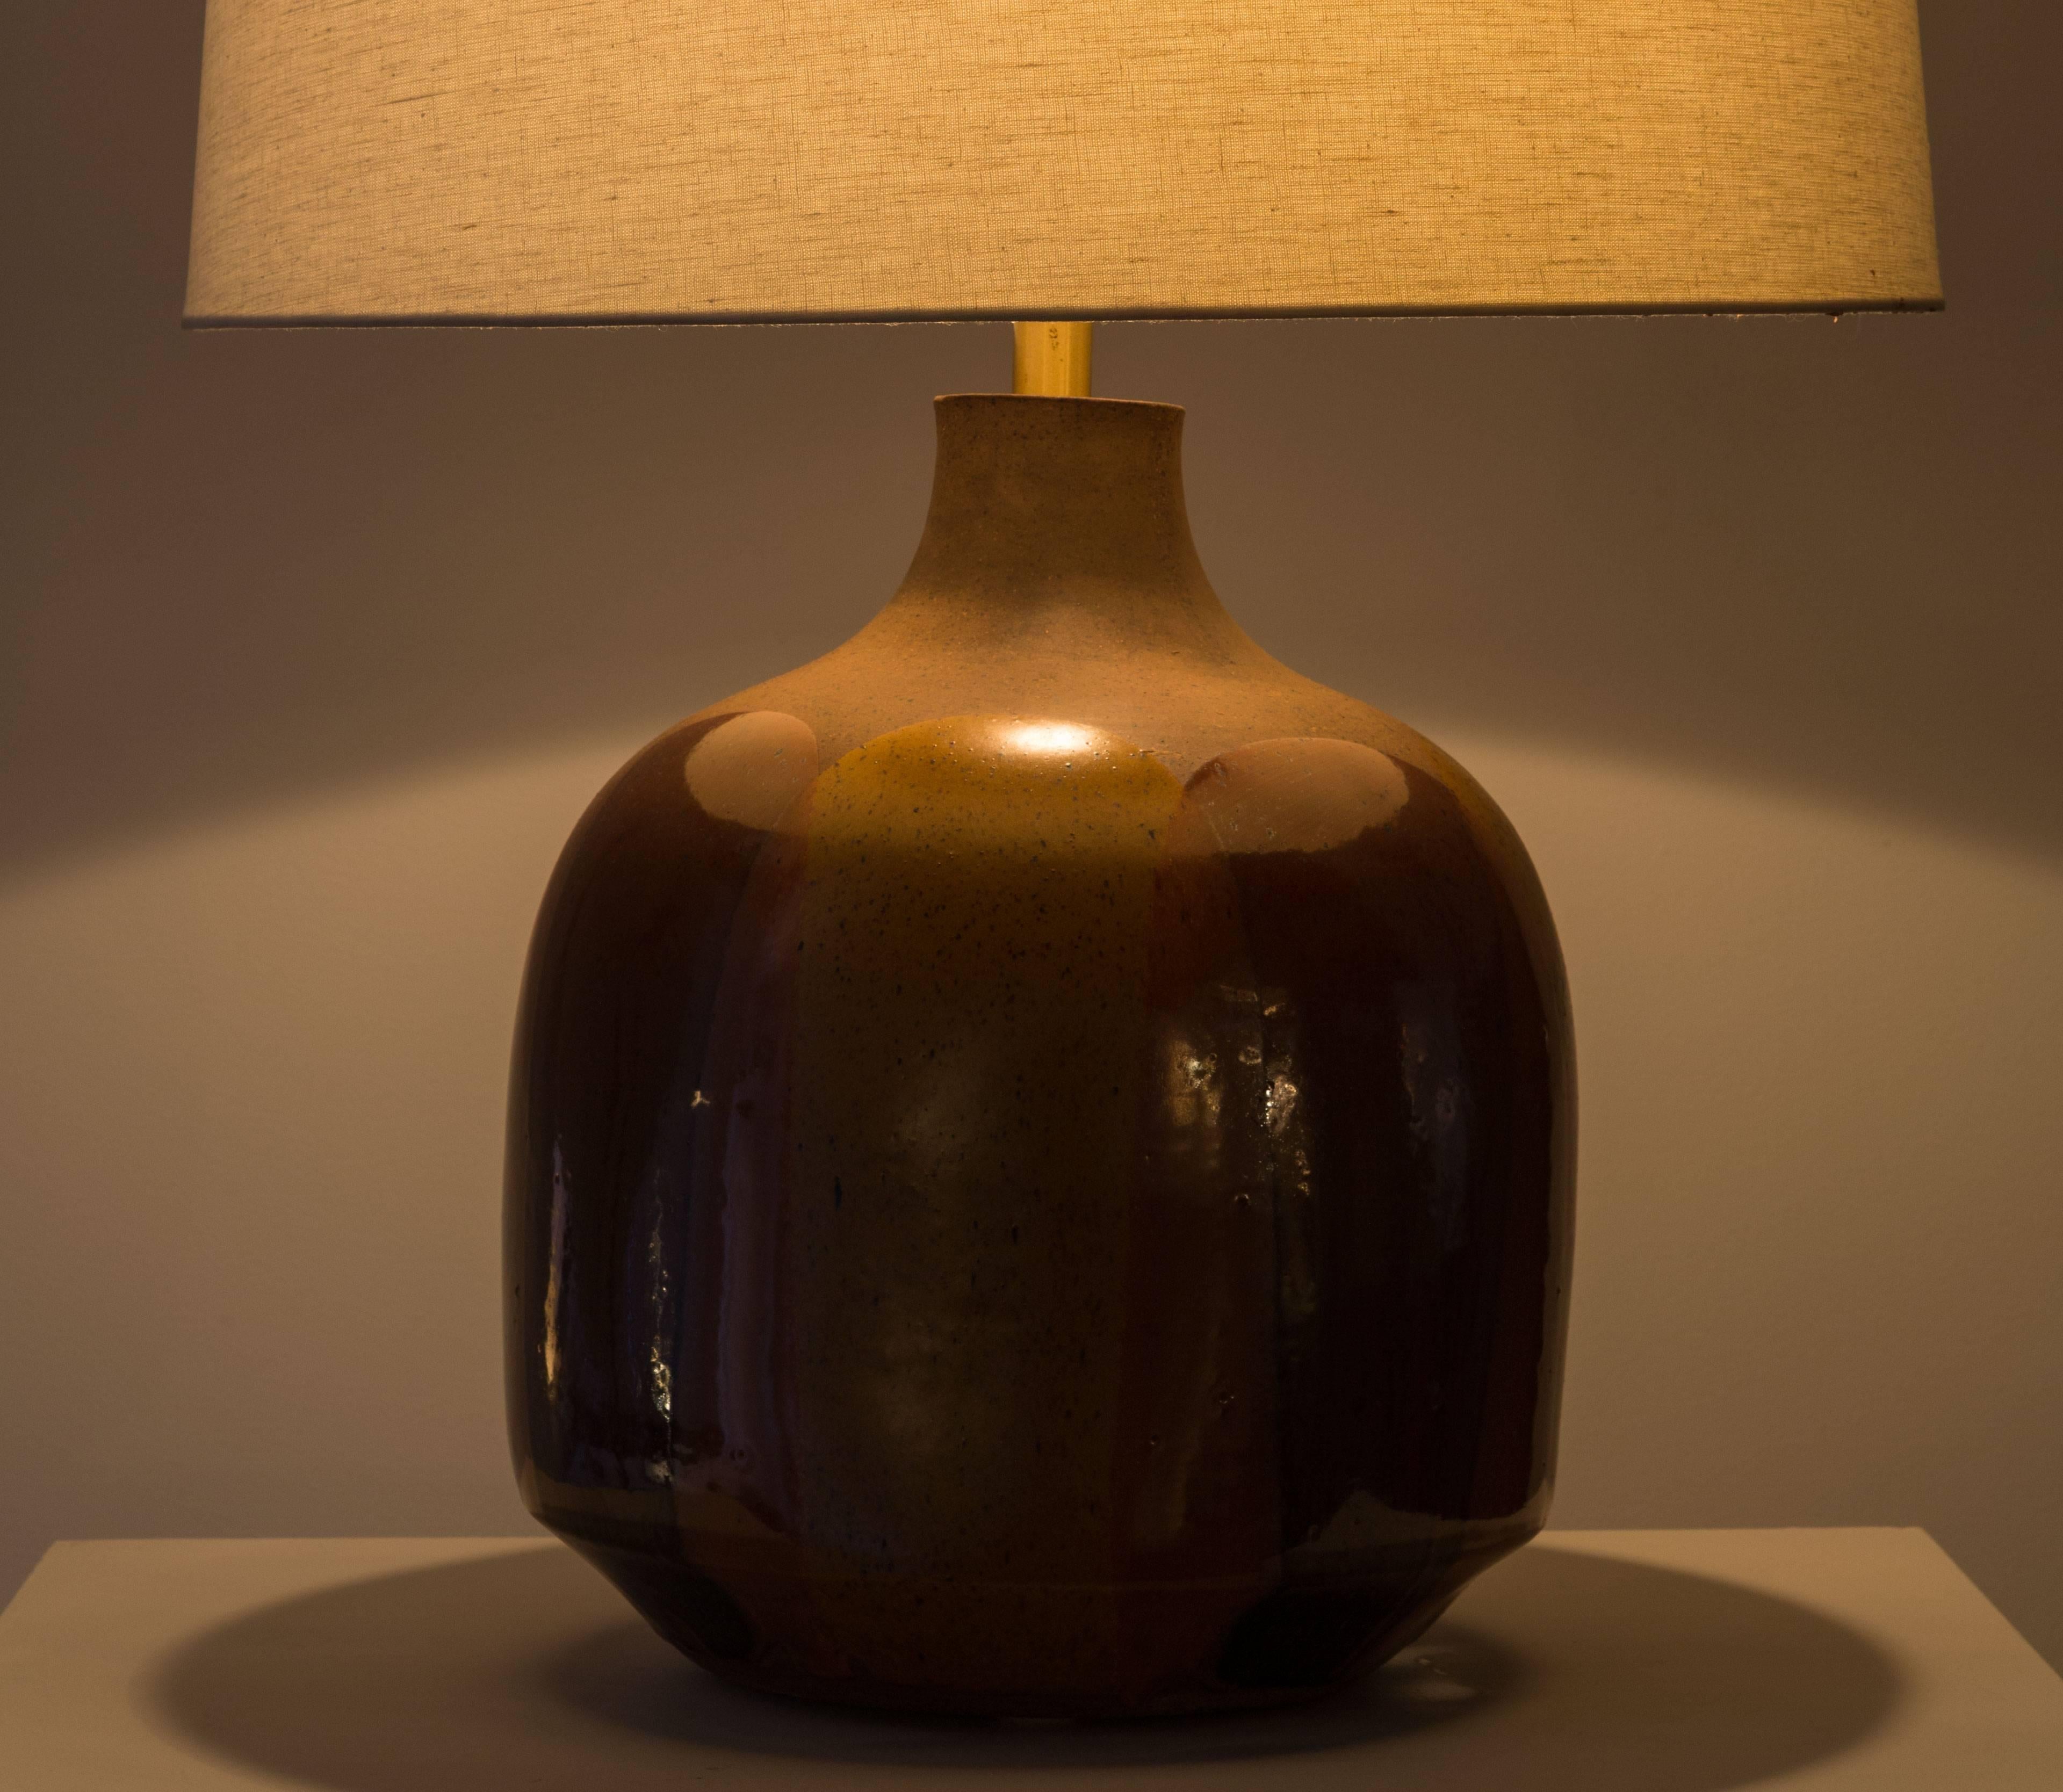 Ceramic hand glazed table lamp designed by David Cressey for Lightolier in the 1950s. Made in the U.S. Shade not included. Takes one E26 75w maximum bulb.